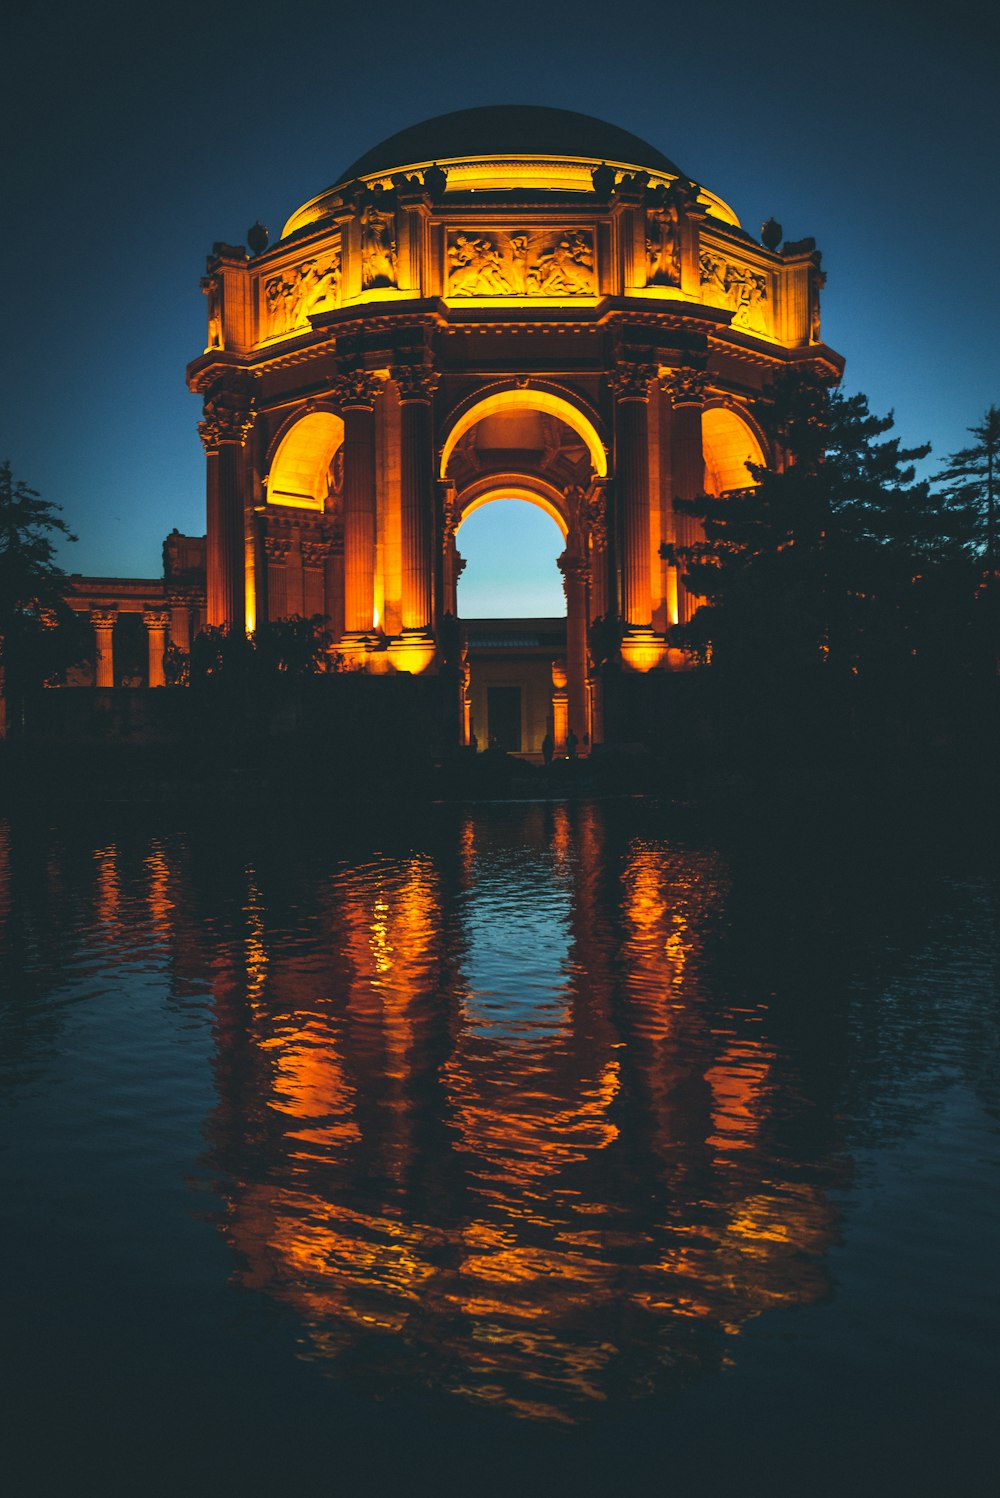 concrete arch with yellow light at night